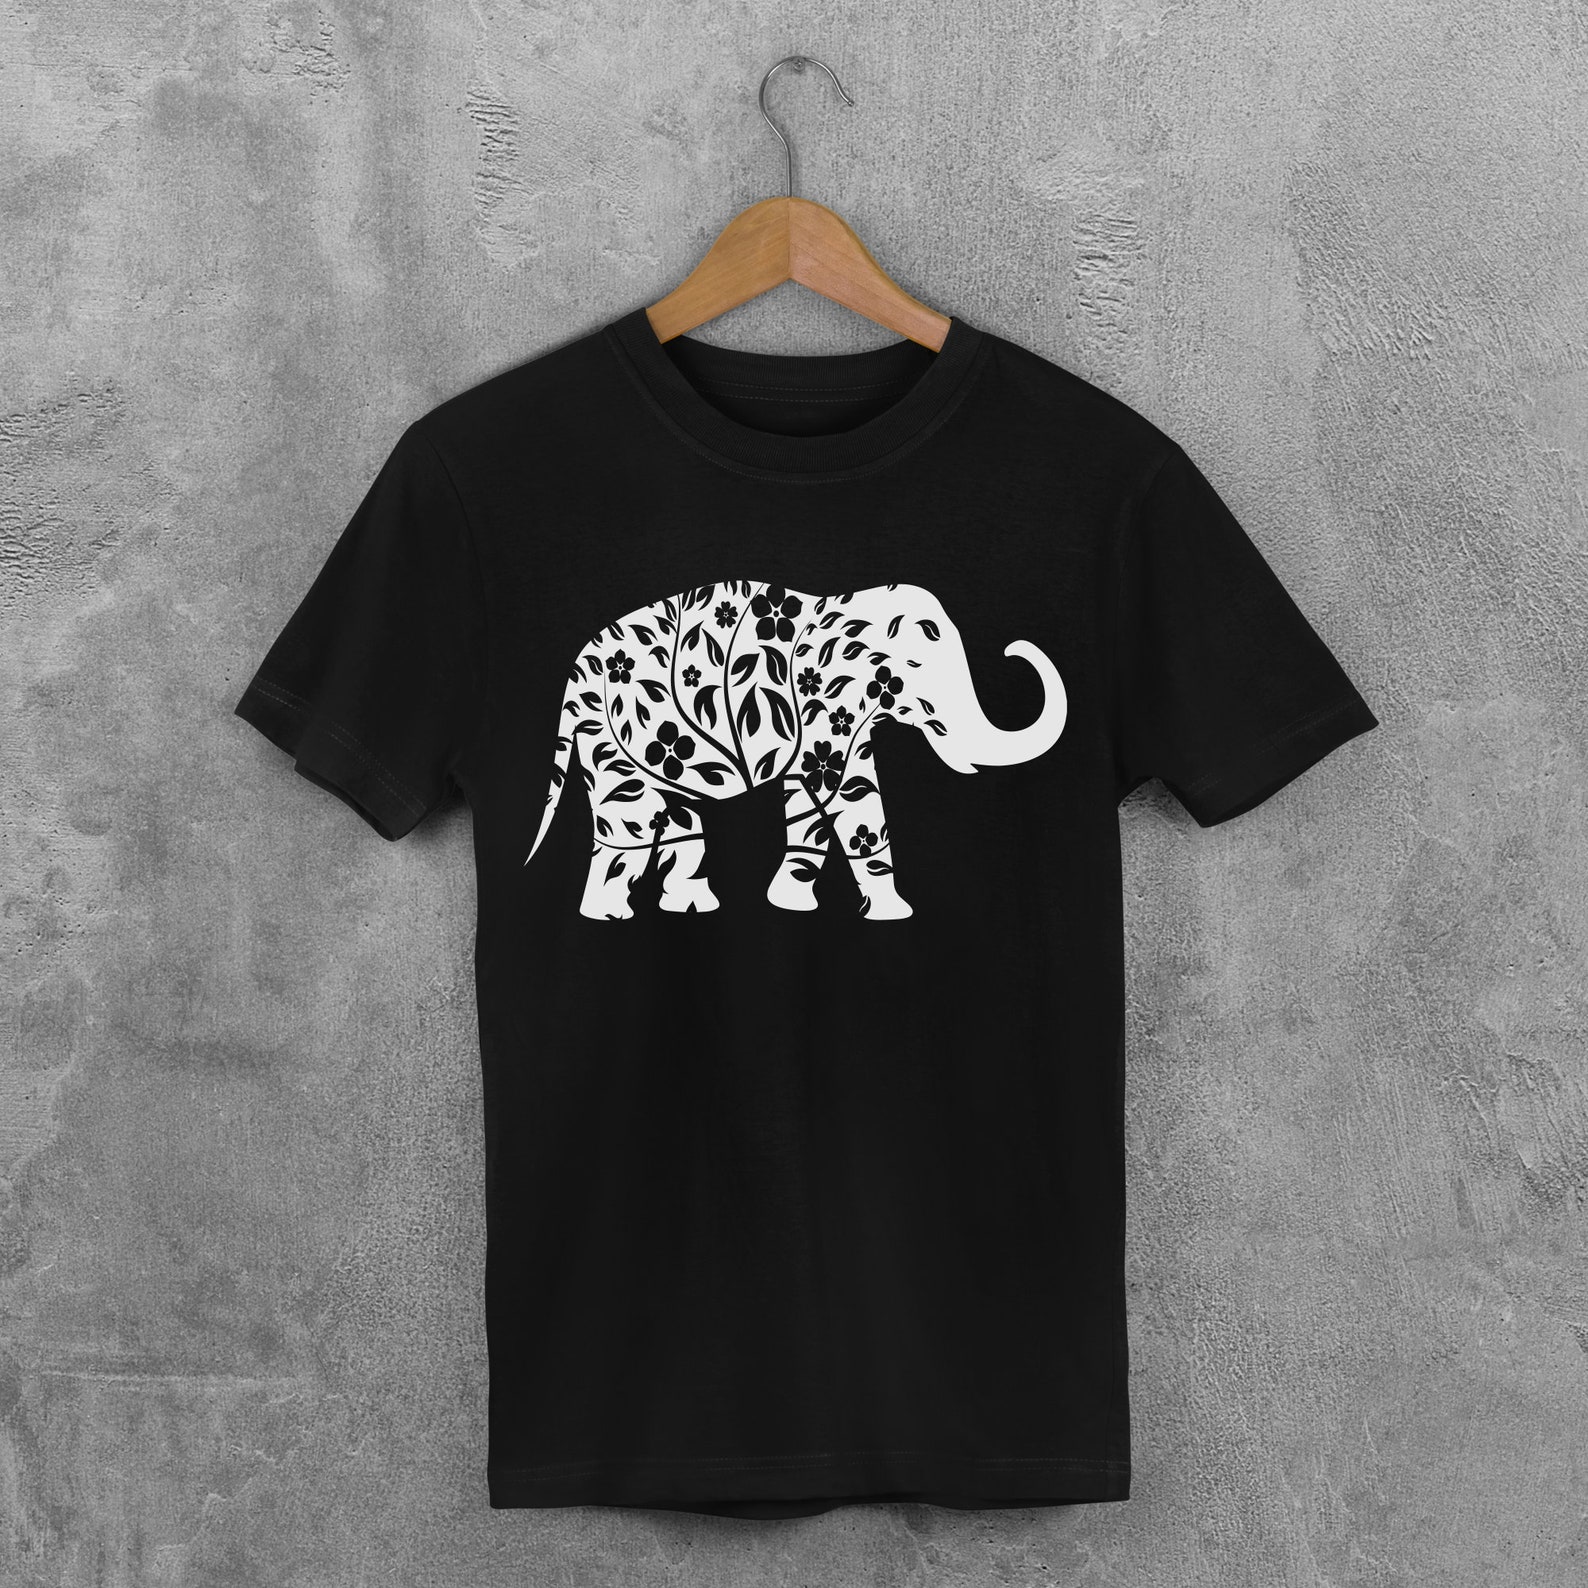 Black t - shirt with a white elephant on it.